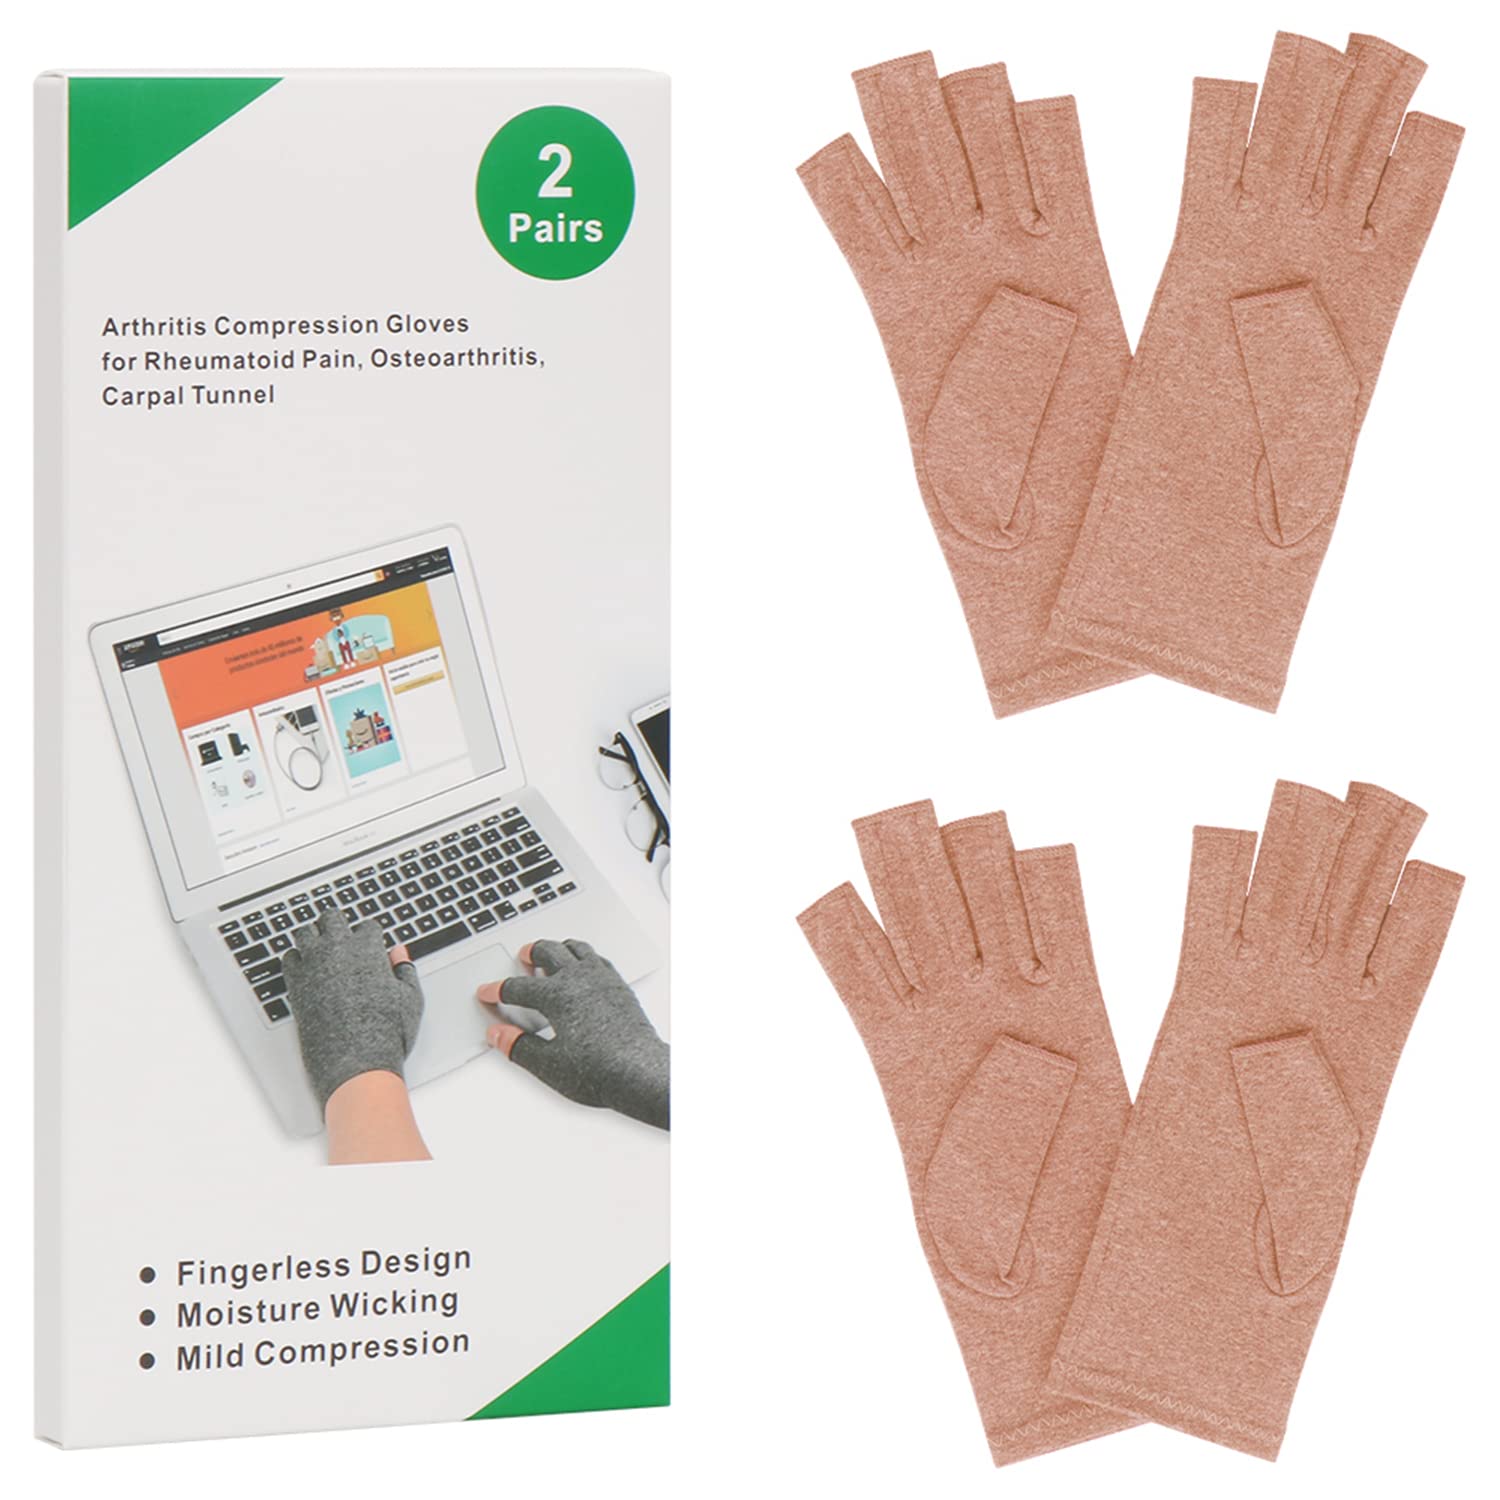 2-Pair Arthritis Compression Gloves for Alleviate Rheumatoid Osteoarthritis, Carpal Tunnel Raynauds Disease, Ease Muscle Tensi on Fingerless, Breathable & Moisture, Women and Men (Coffee, Small)